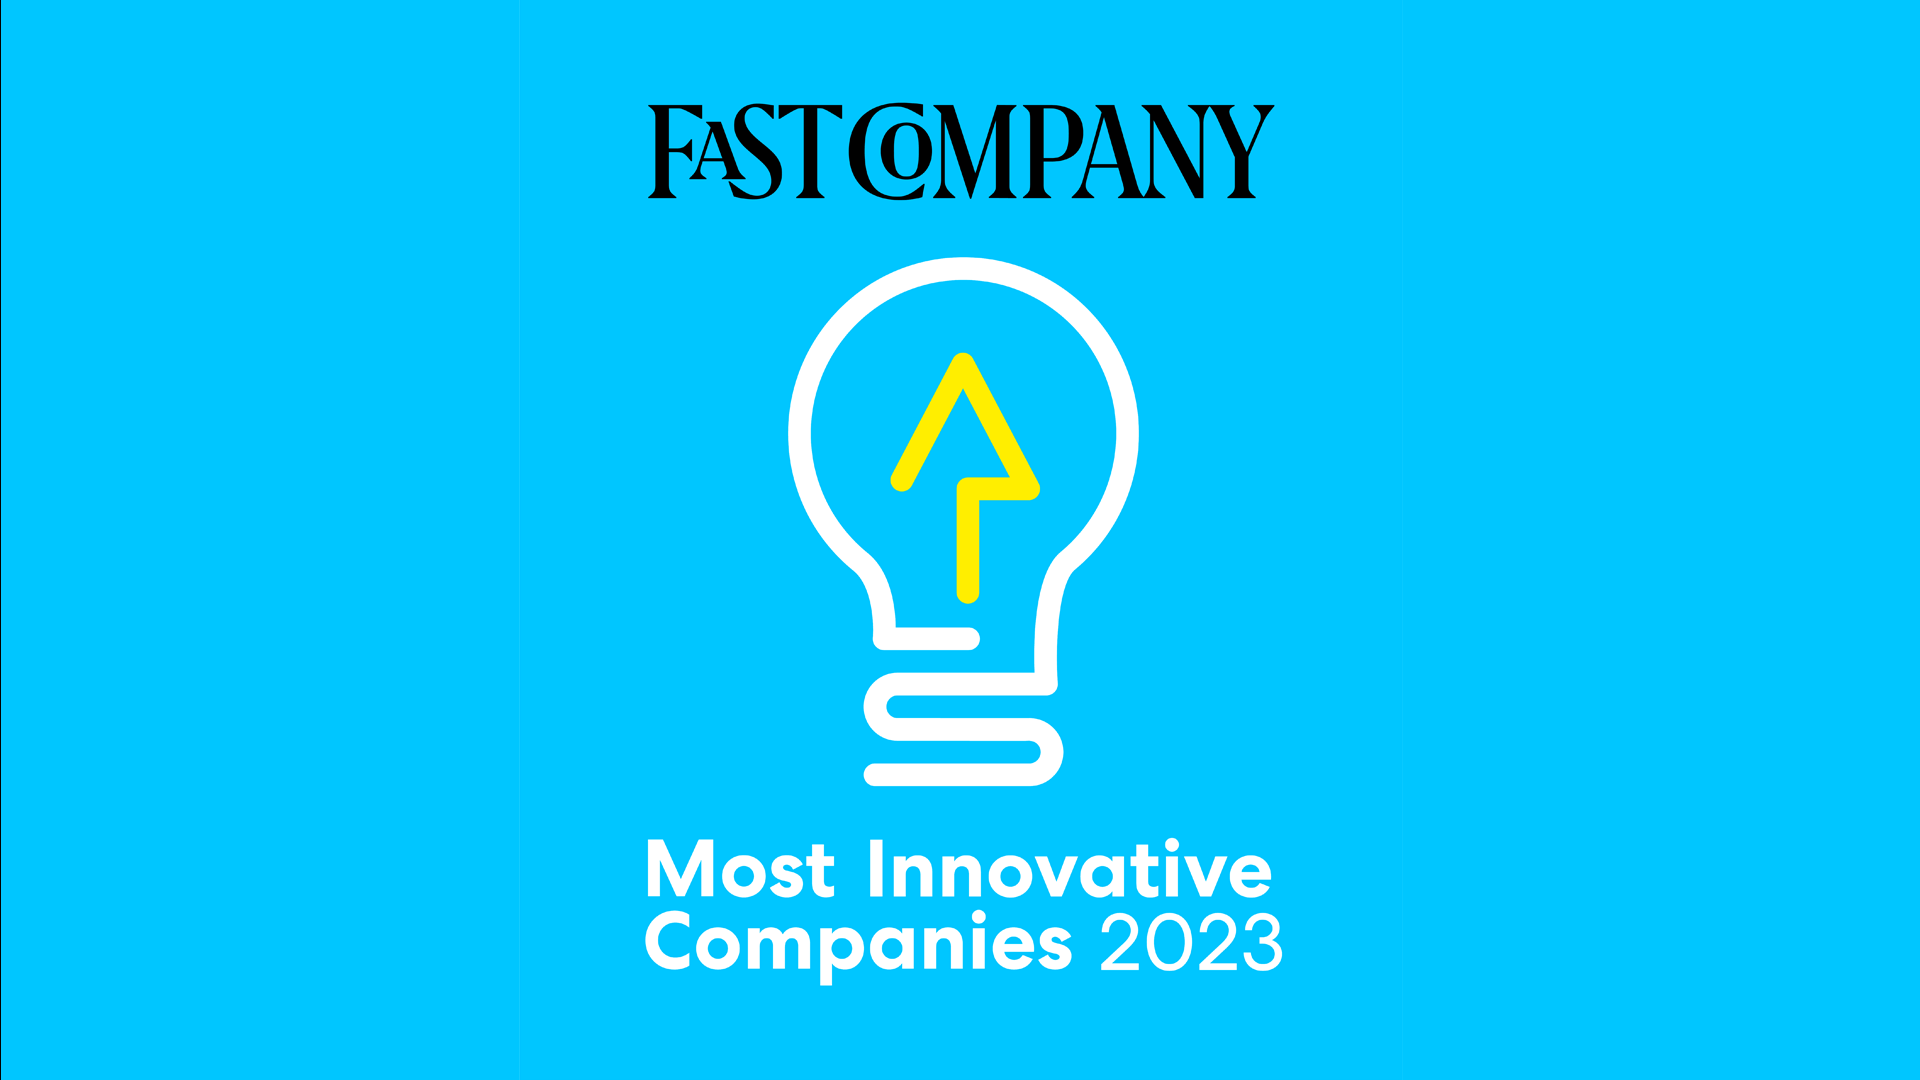 Level Ex is a proud Award Winner of the 2023 Fast Co Most Innovative Company Award